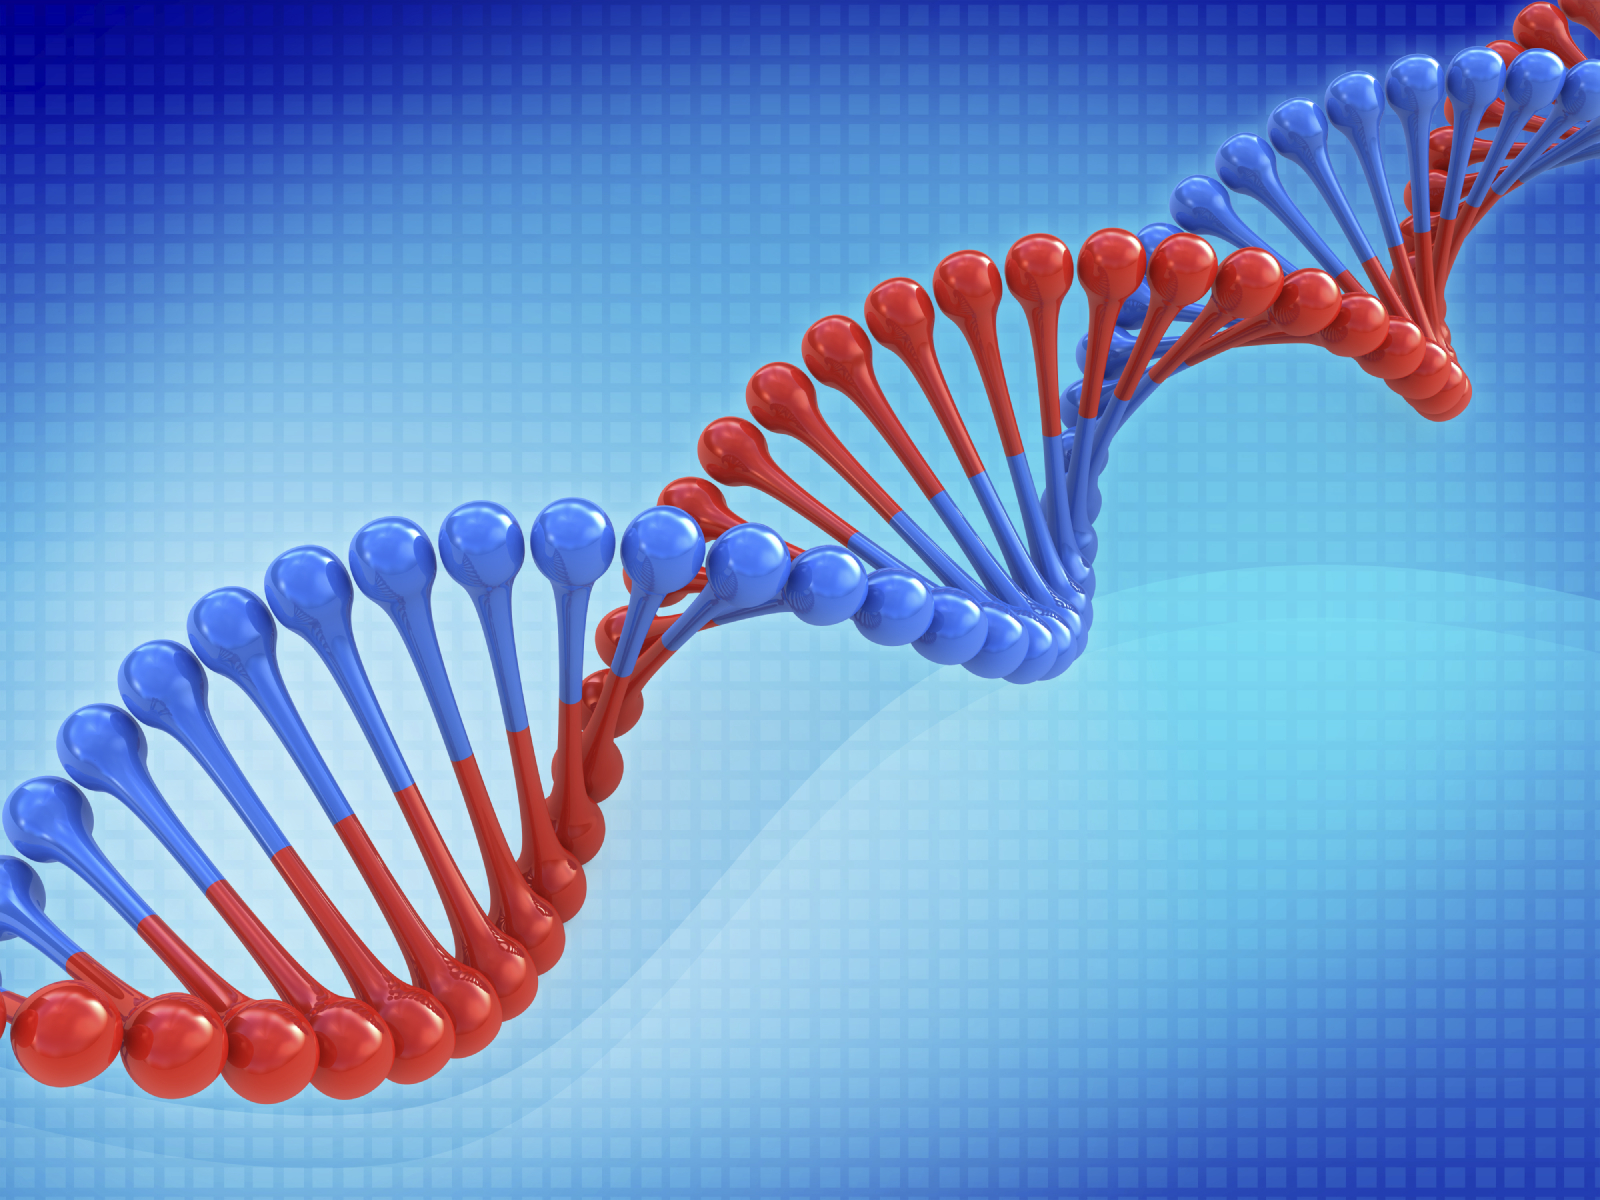 DNA code abstract background